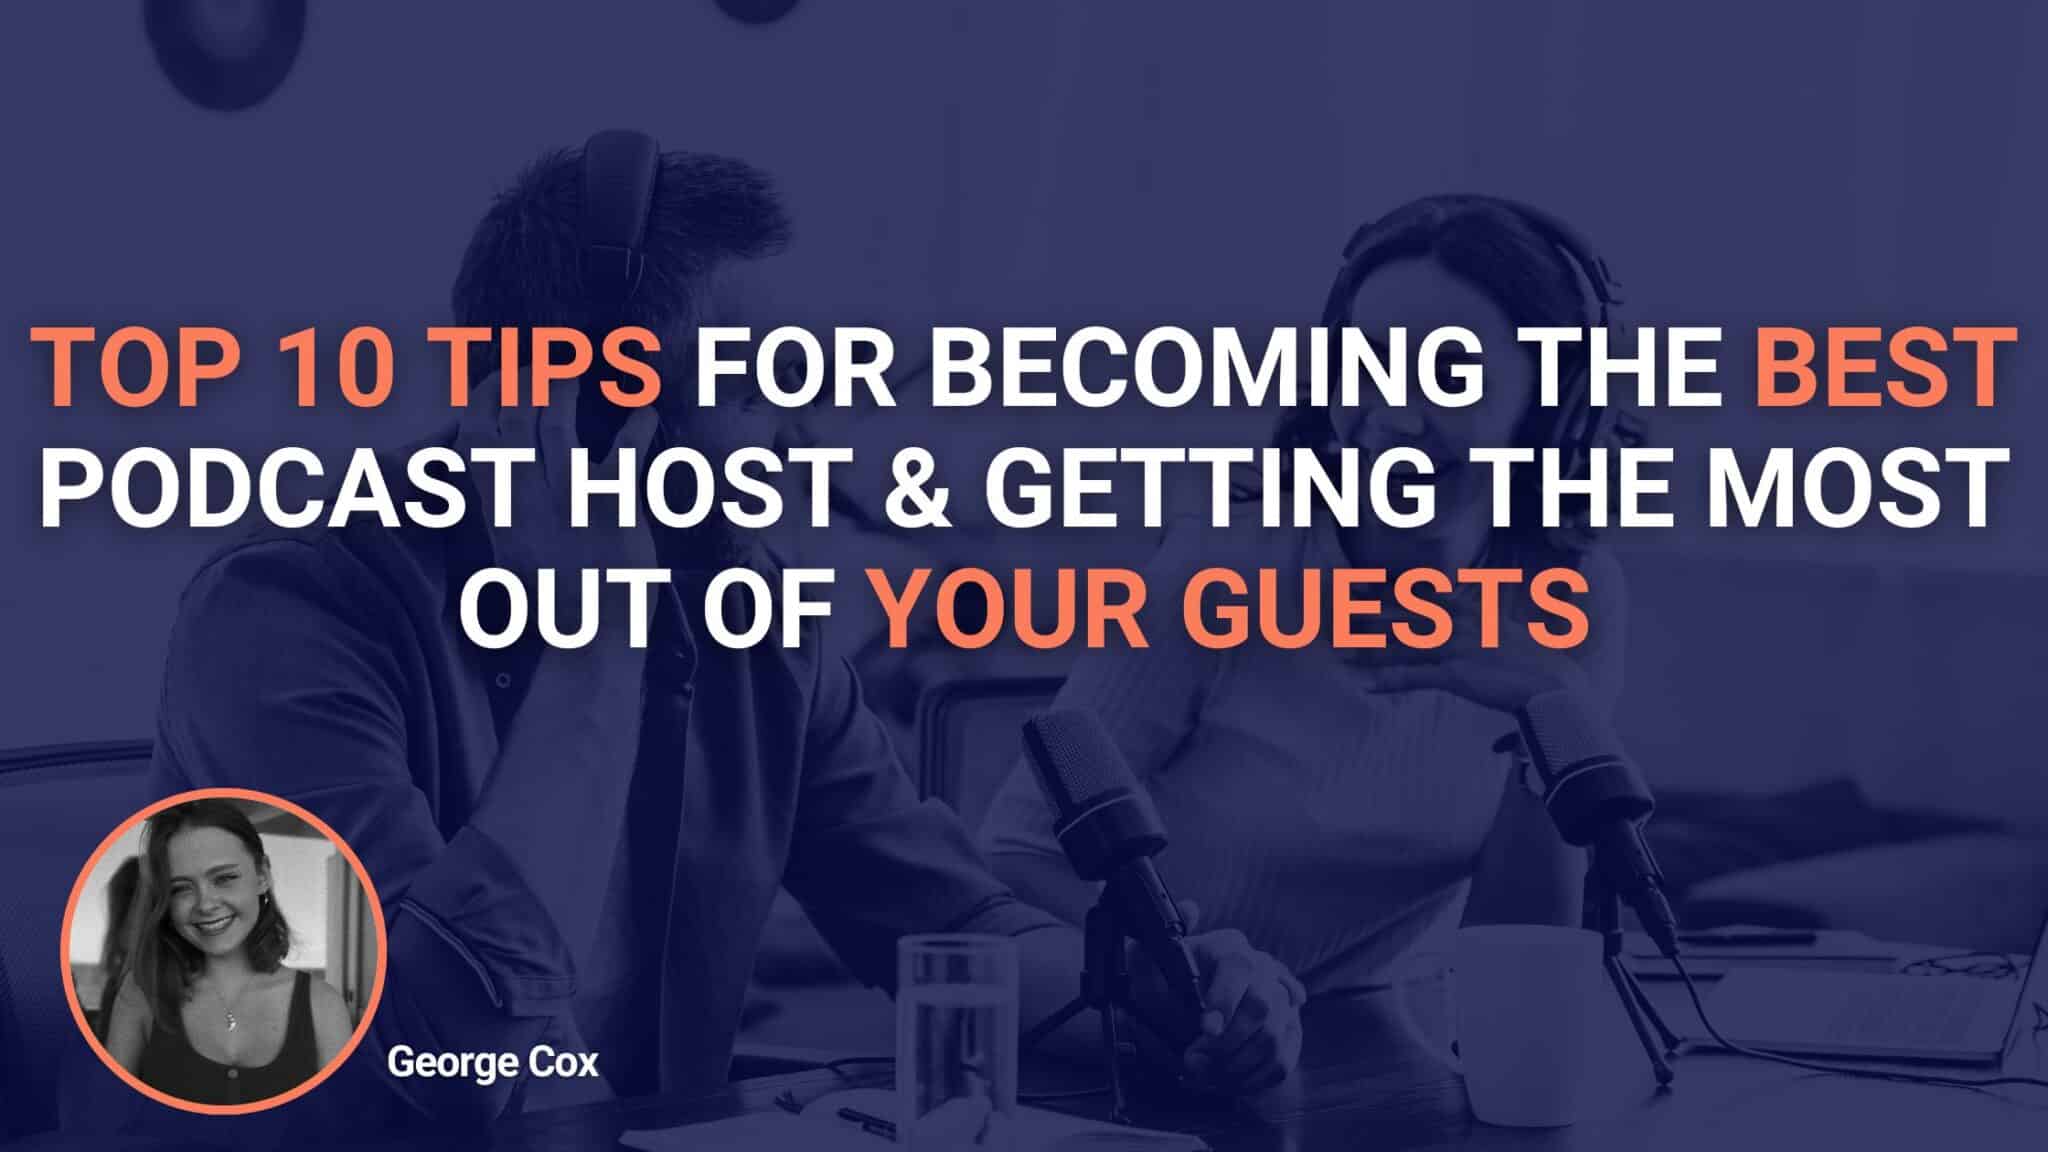 Top 10 Tips For Becoming The Best Podcast Host & Getting The Most Out Of Your Guests